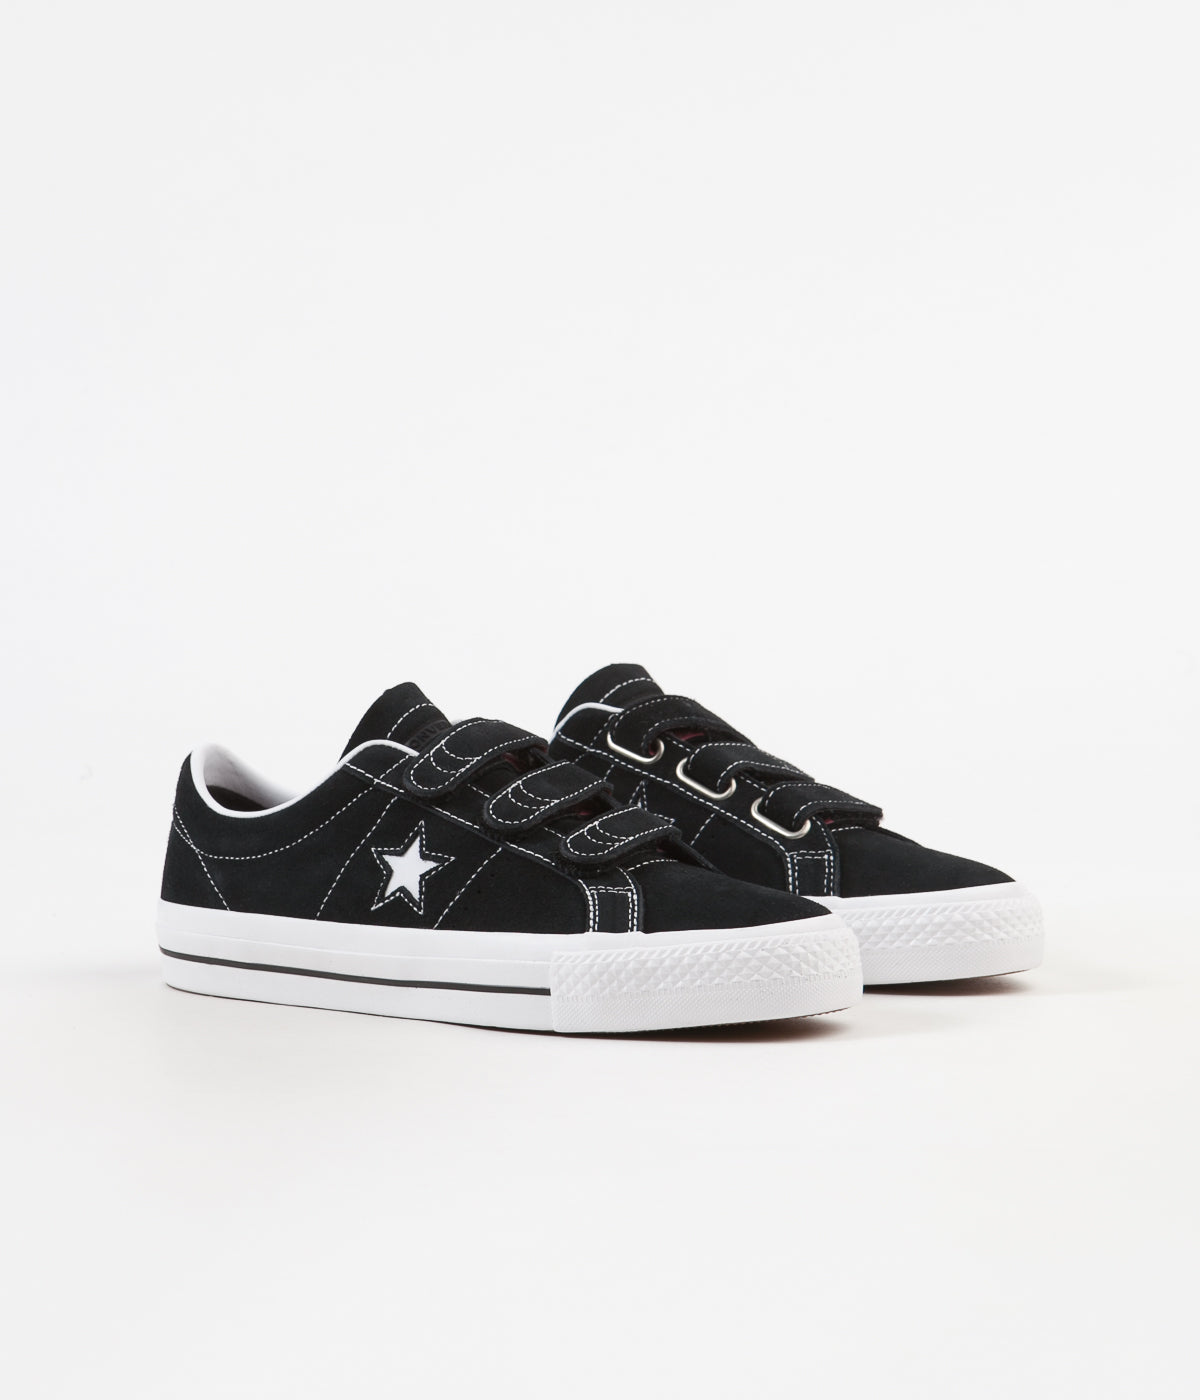 converse one star low profile ox